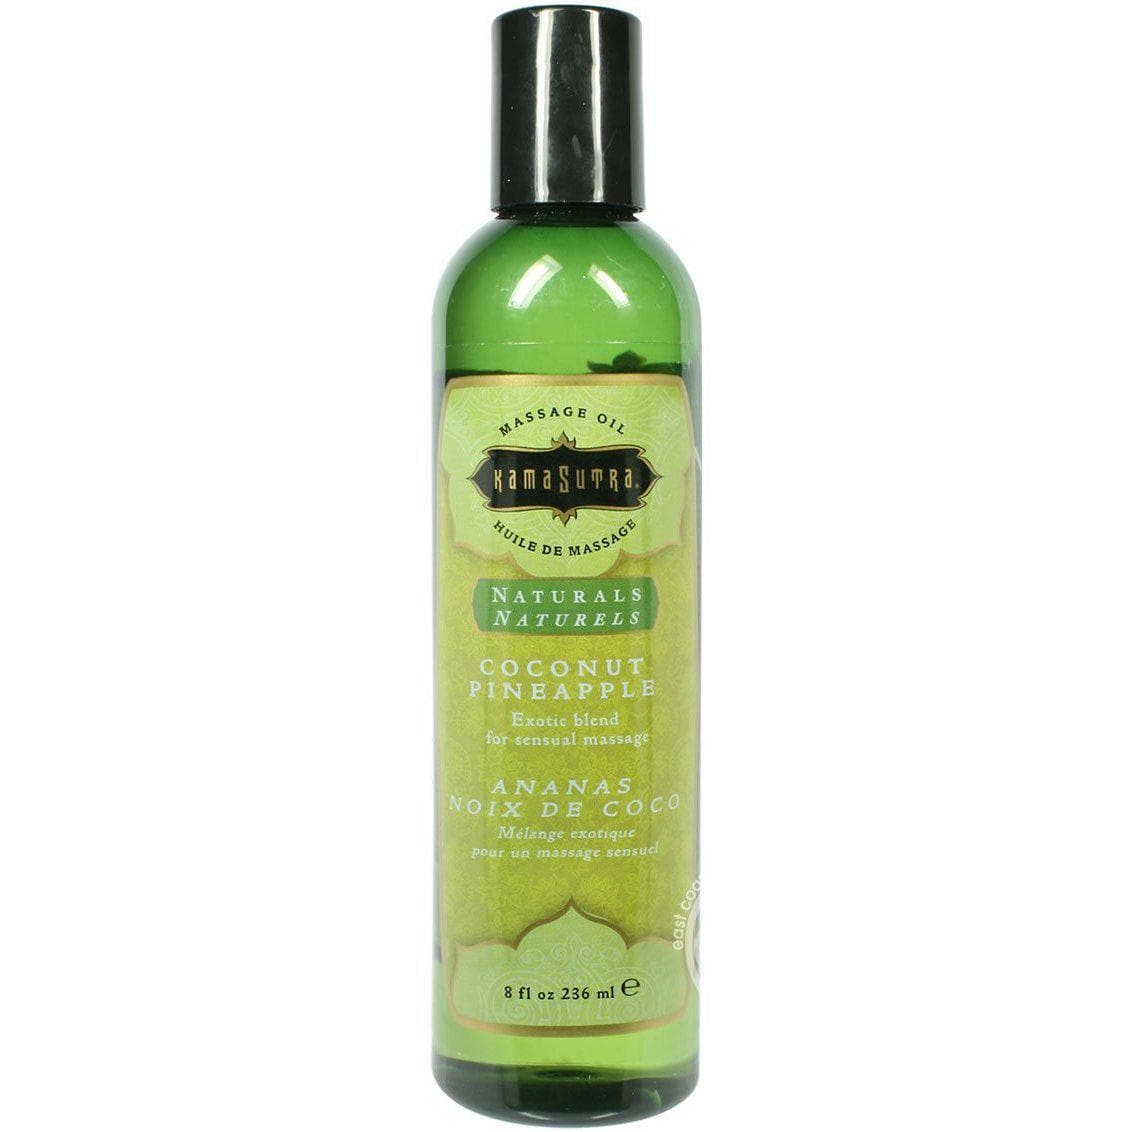 Kama Sutra Naturals Massage Oil Coconut-Pineapple - Romantic Blessings